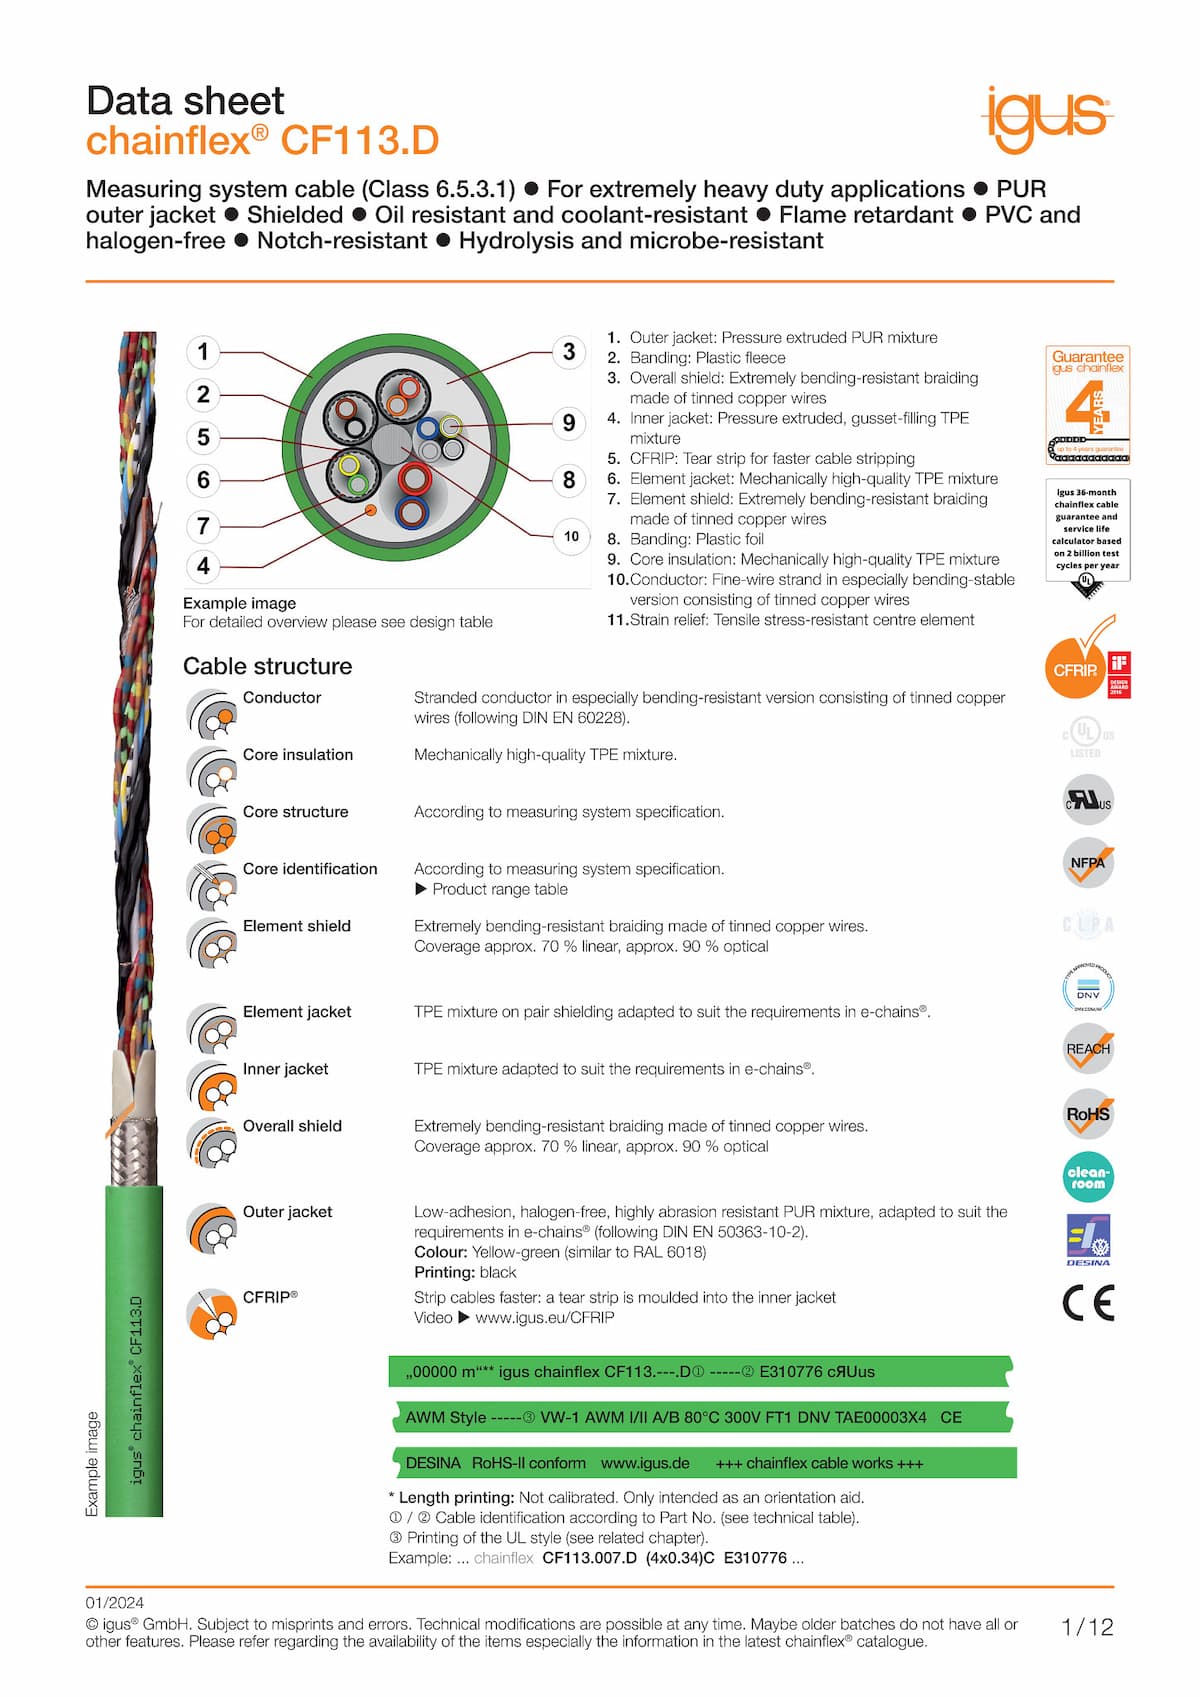 Technical data sheet chainflex® measuring system cable CF113.D